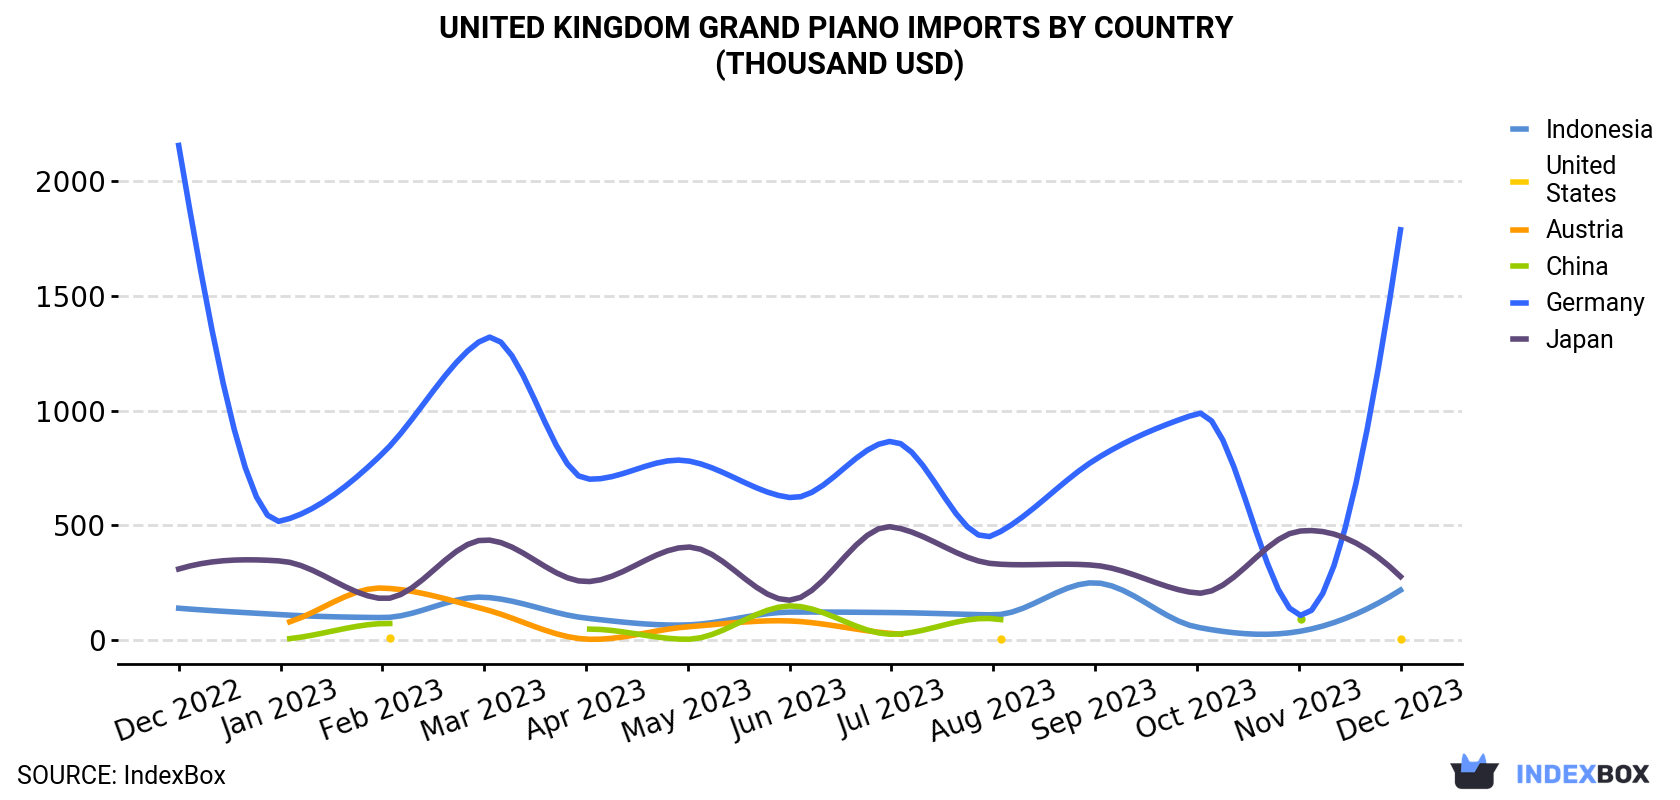 United Kingdom Grand Piano Imports By Country (Thousand USD)